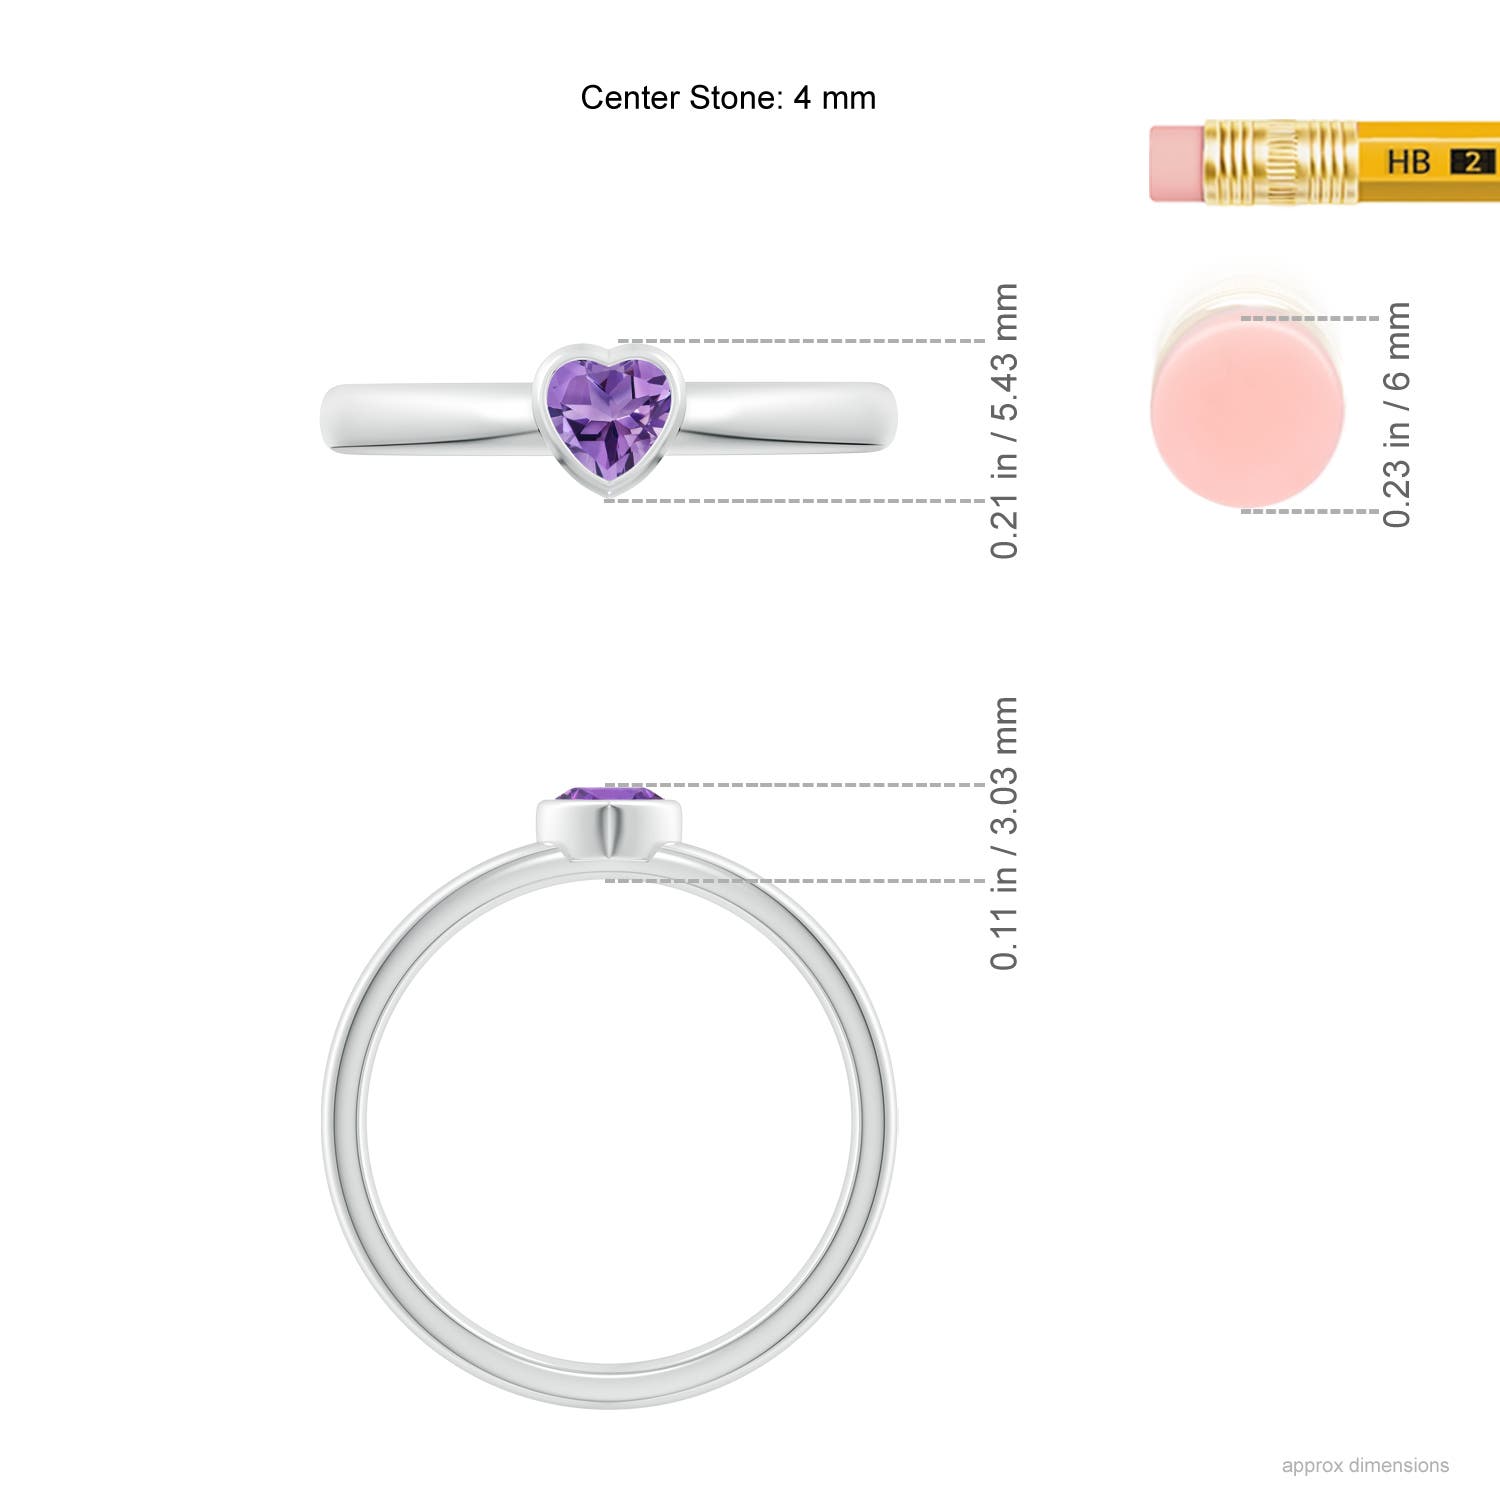 AA - Amethyst / 0.2 CT / 14 KT White Gold